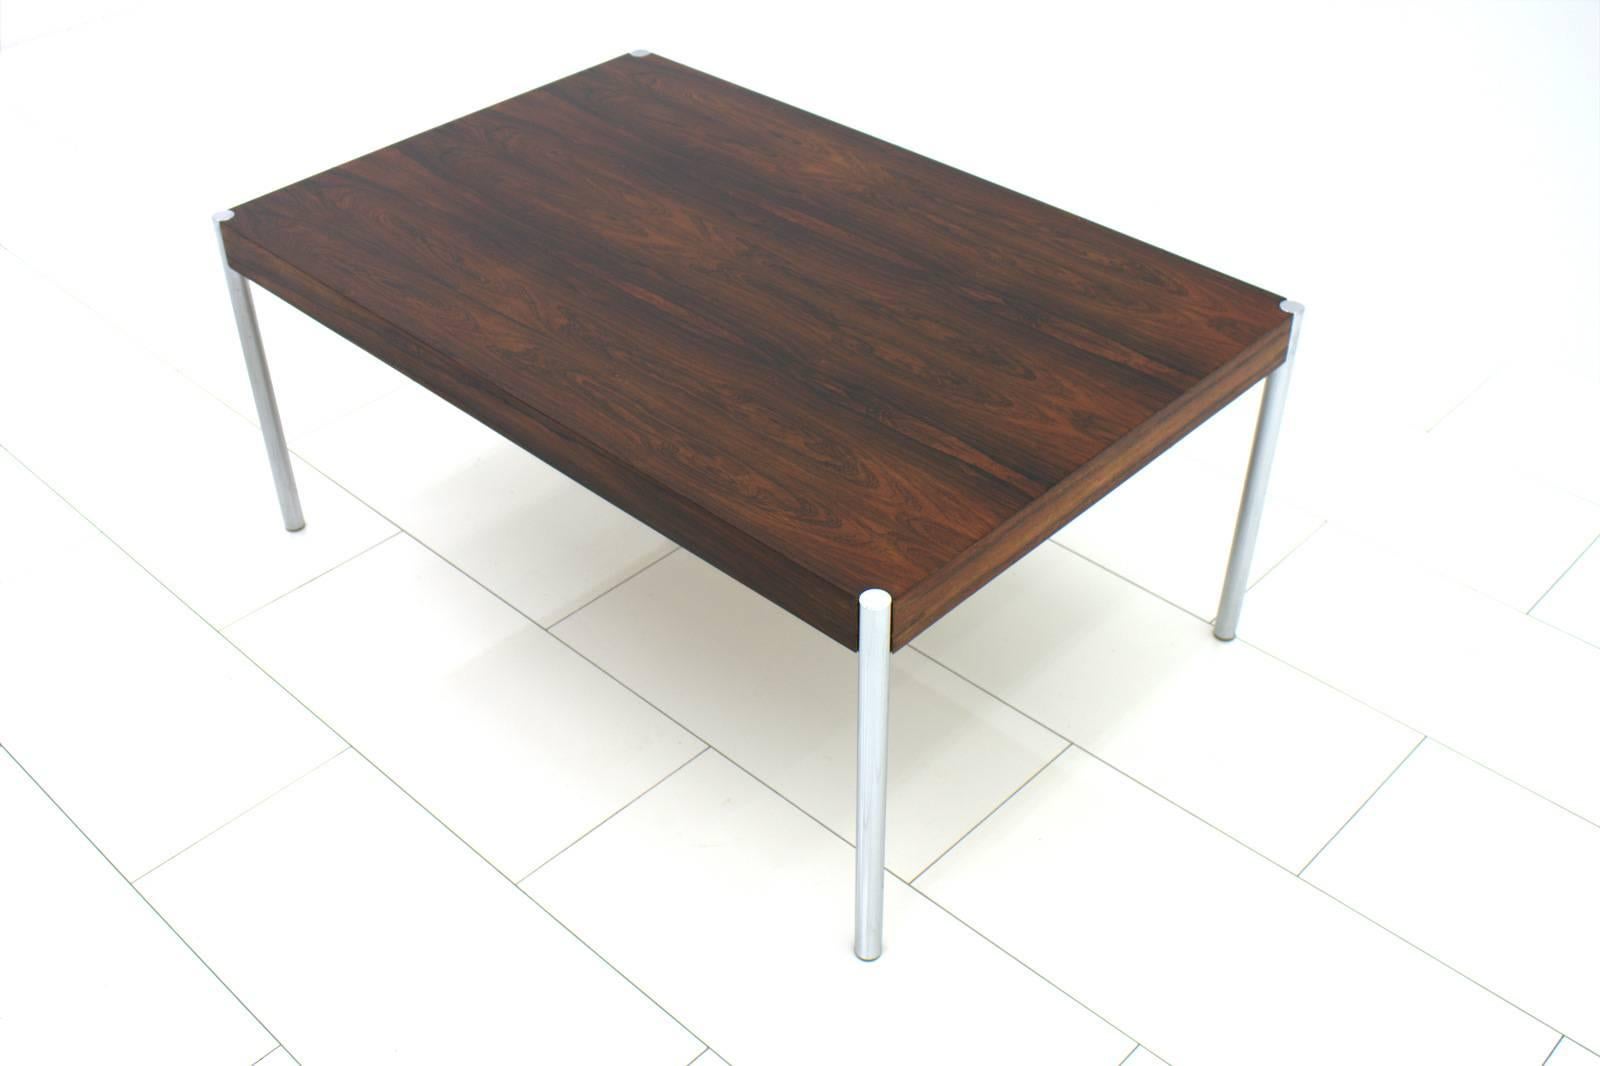 Coffee table by Edlef Bandixen, Switzerland, 1970s.
Excellent condition.

Worldwide shipping.